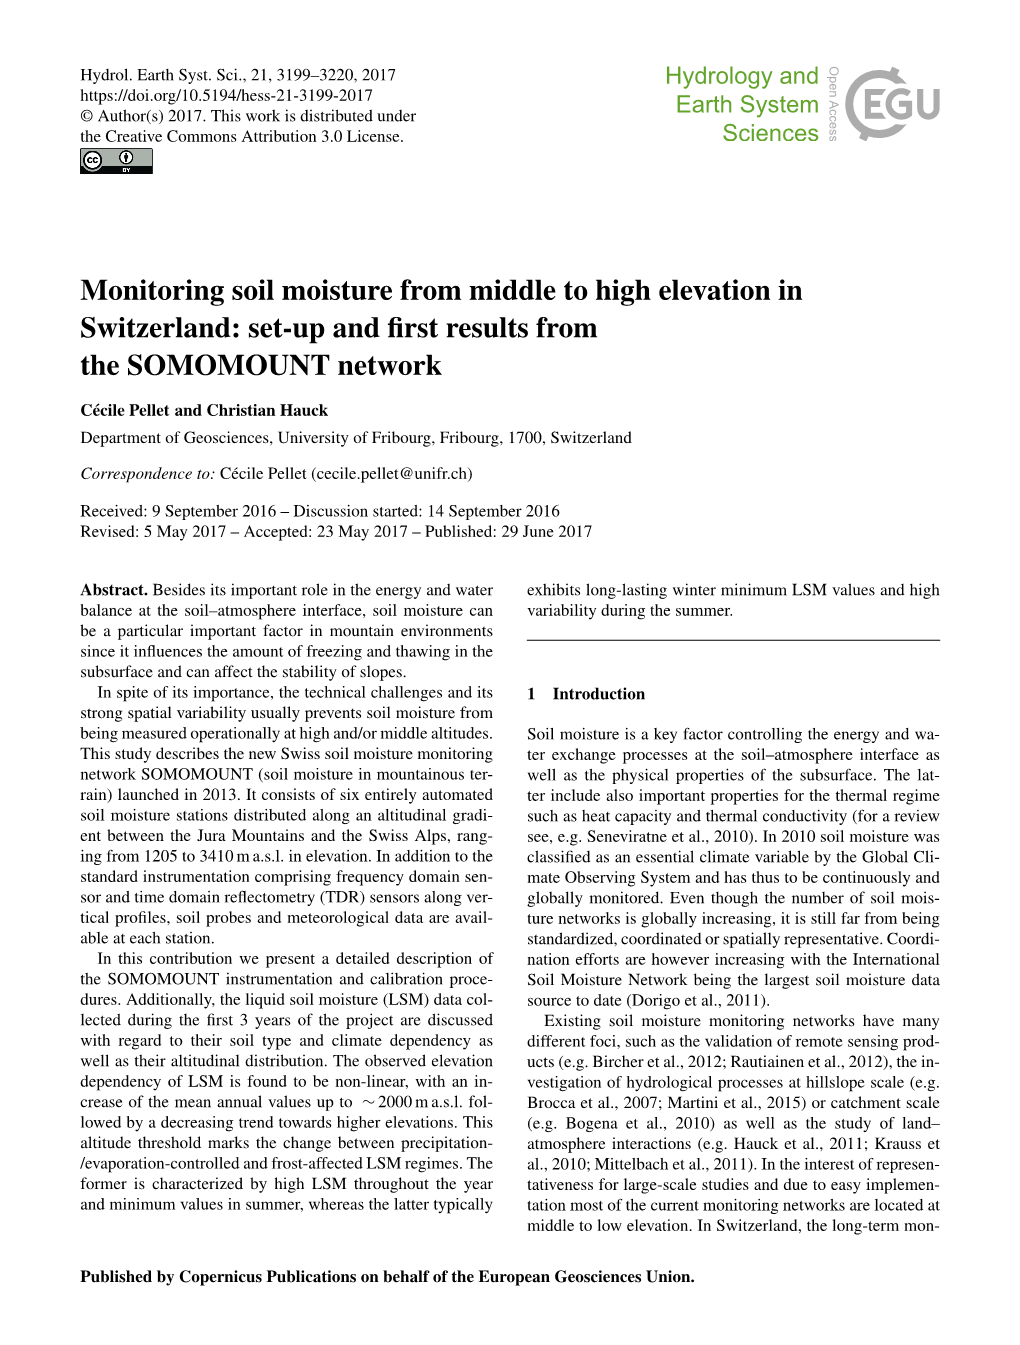 Monitoring Soil Moisture from Middle to High Elevation in Switzerland: Set-Up and First Results from the SOMOMOUNT Network